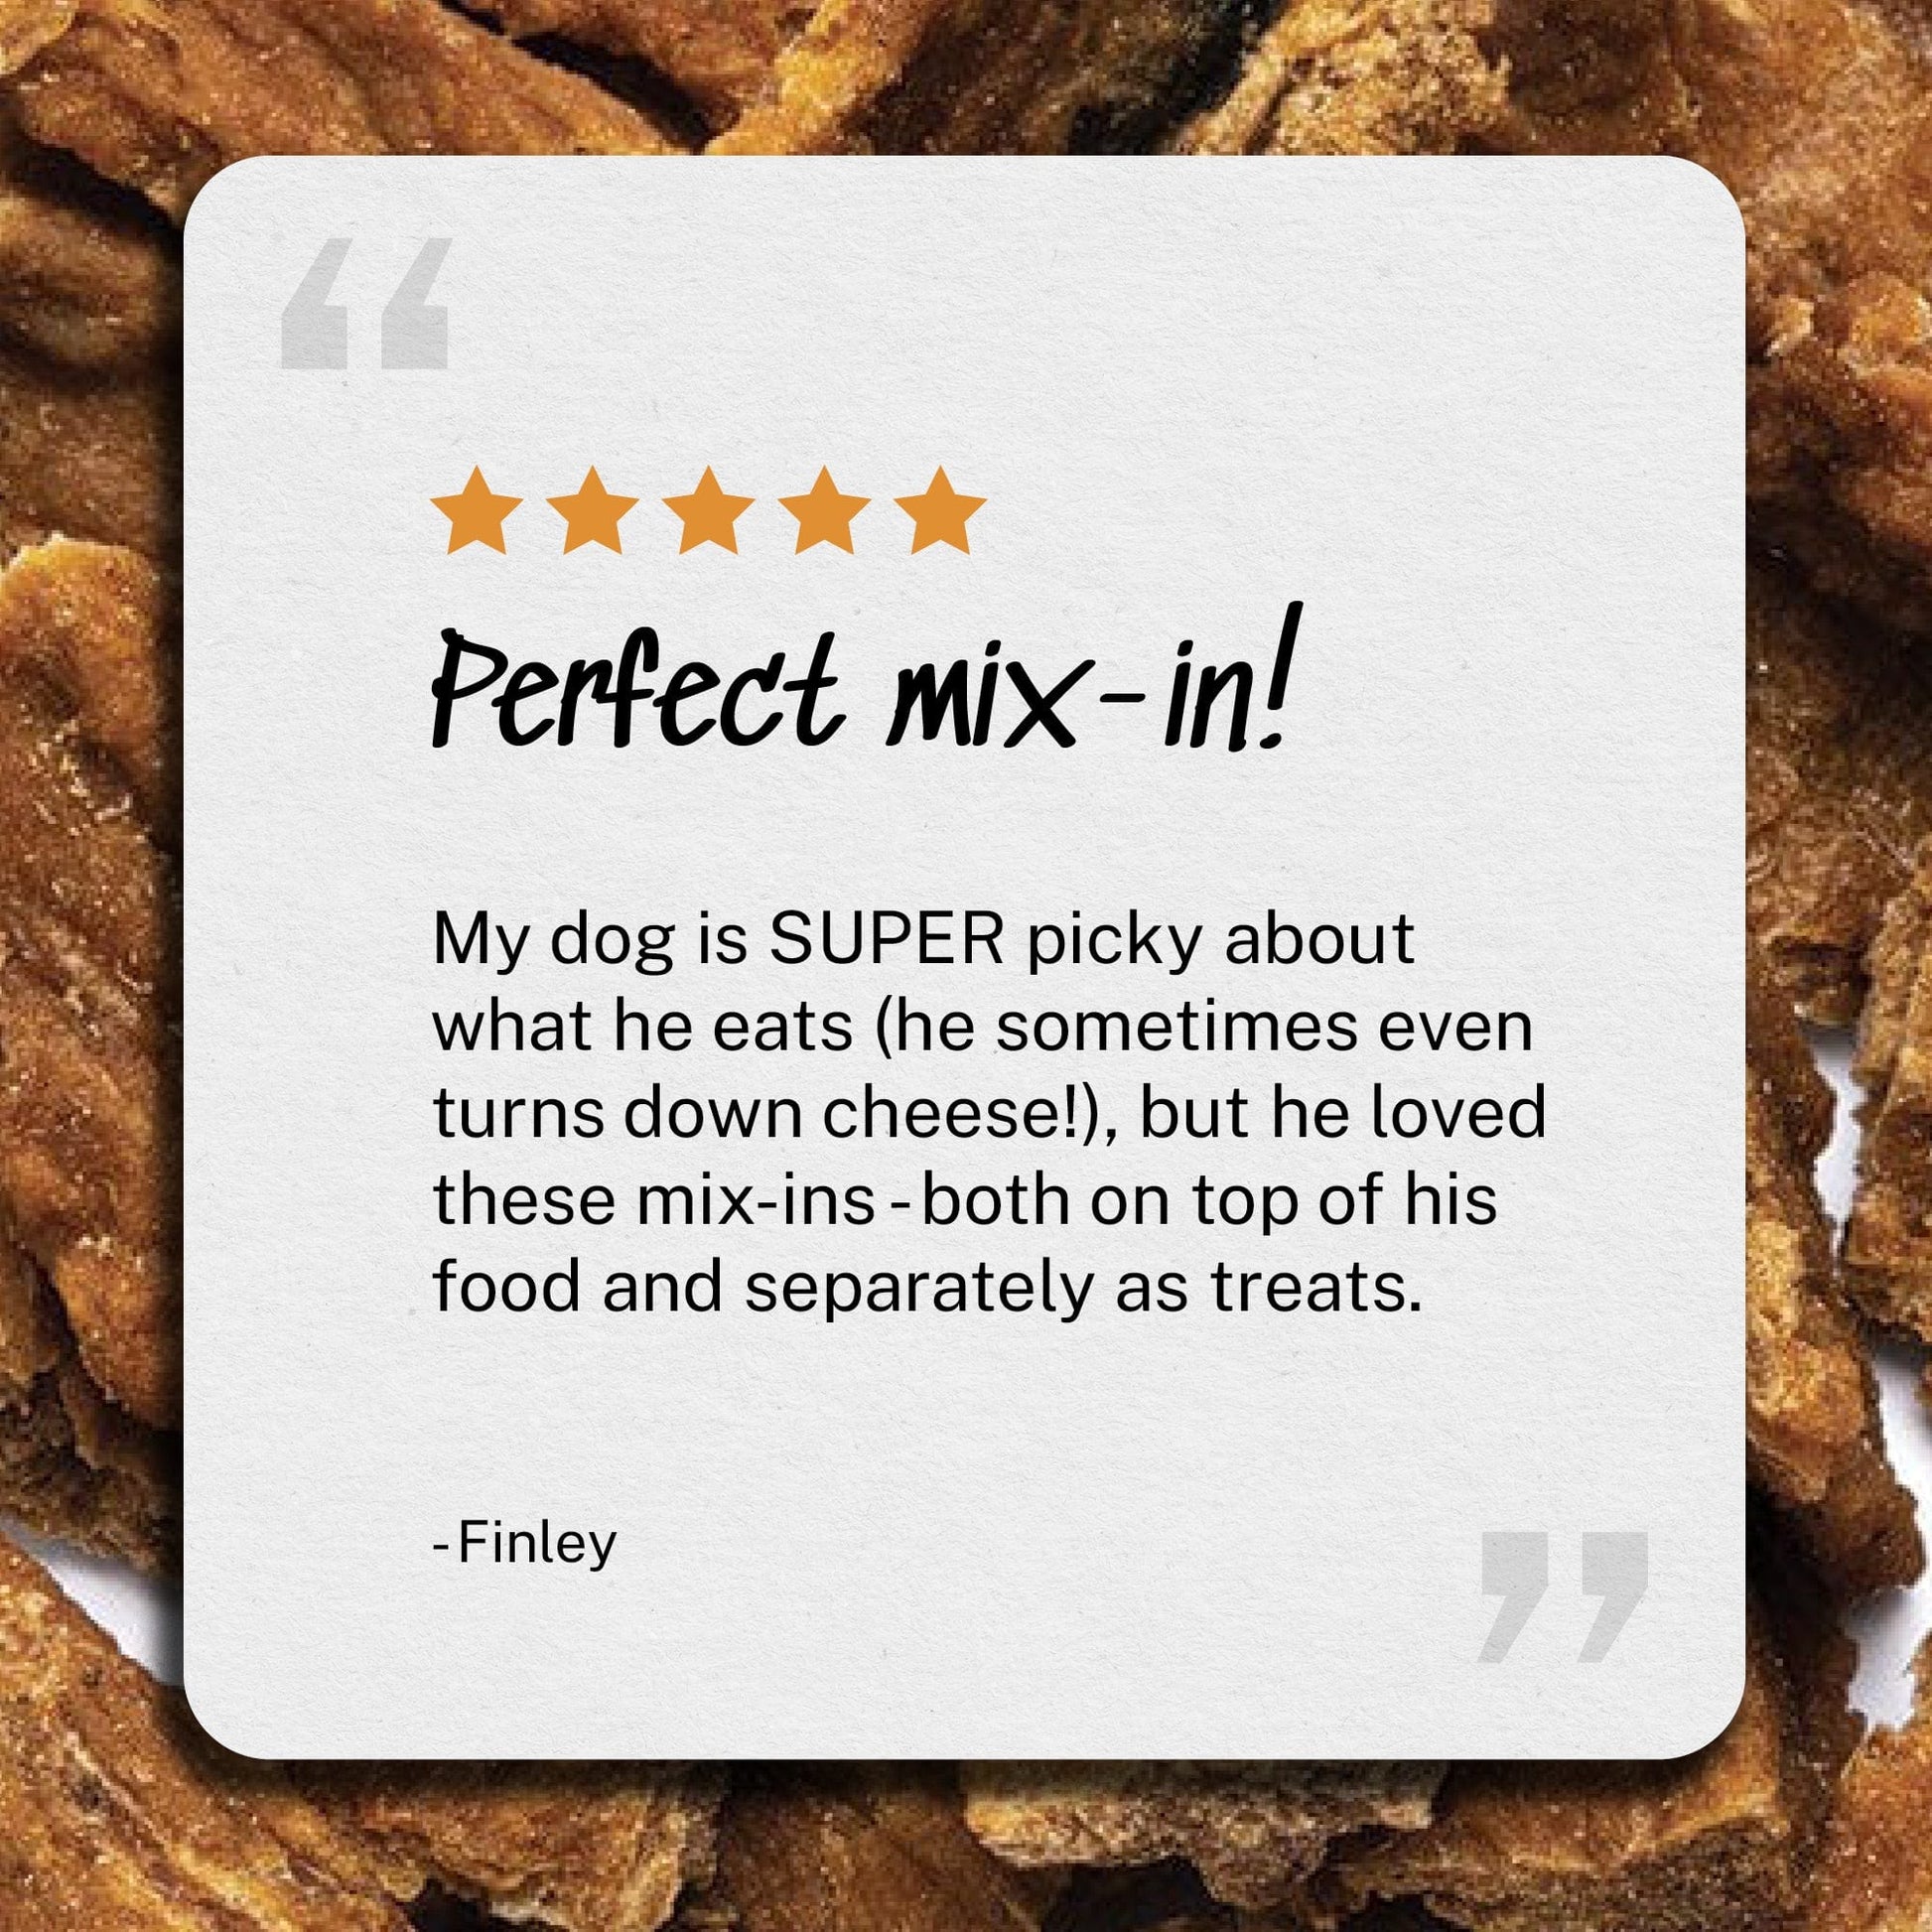 Review: Perfect mix-in - My dog is SUPER picky about what he eats (he sometimes even turns down cheese!), but he loved these mix-ins - both on top of his food and separately as treats.- Finley